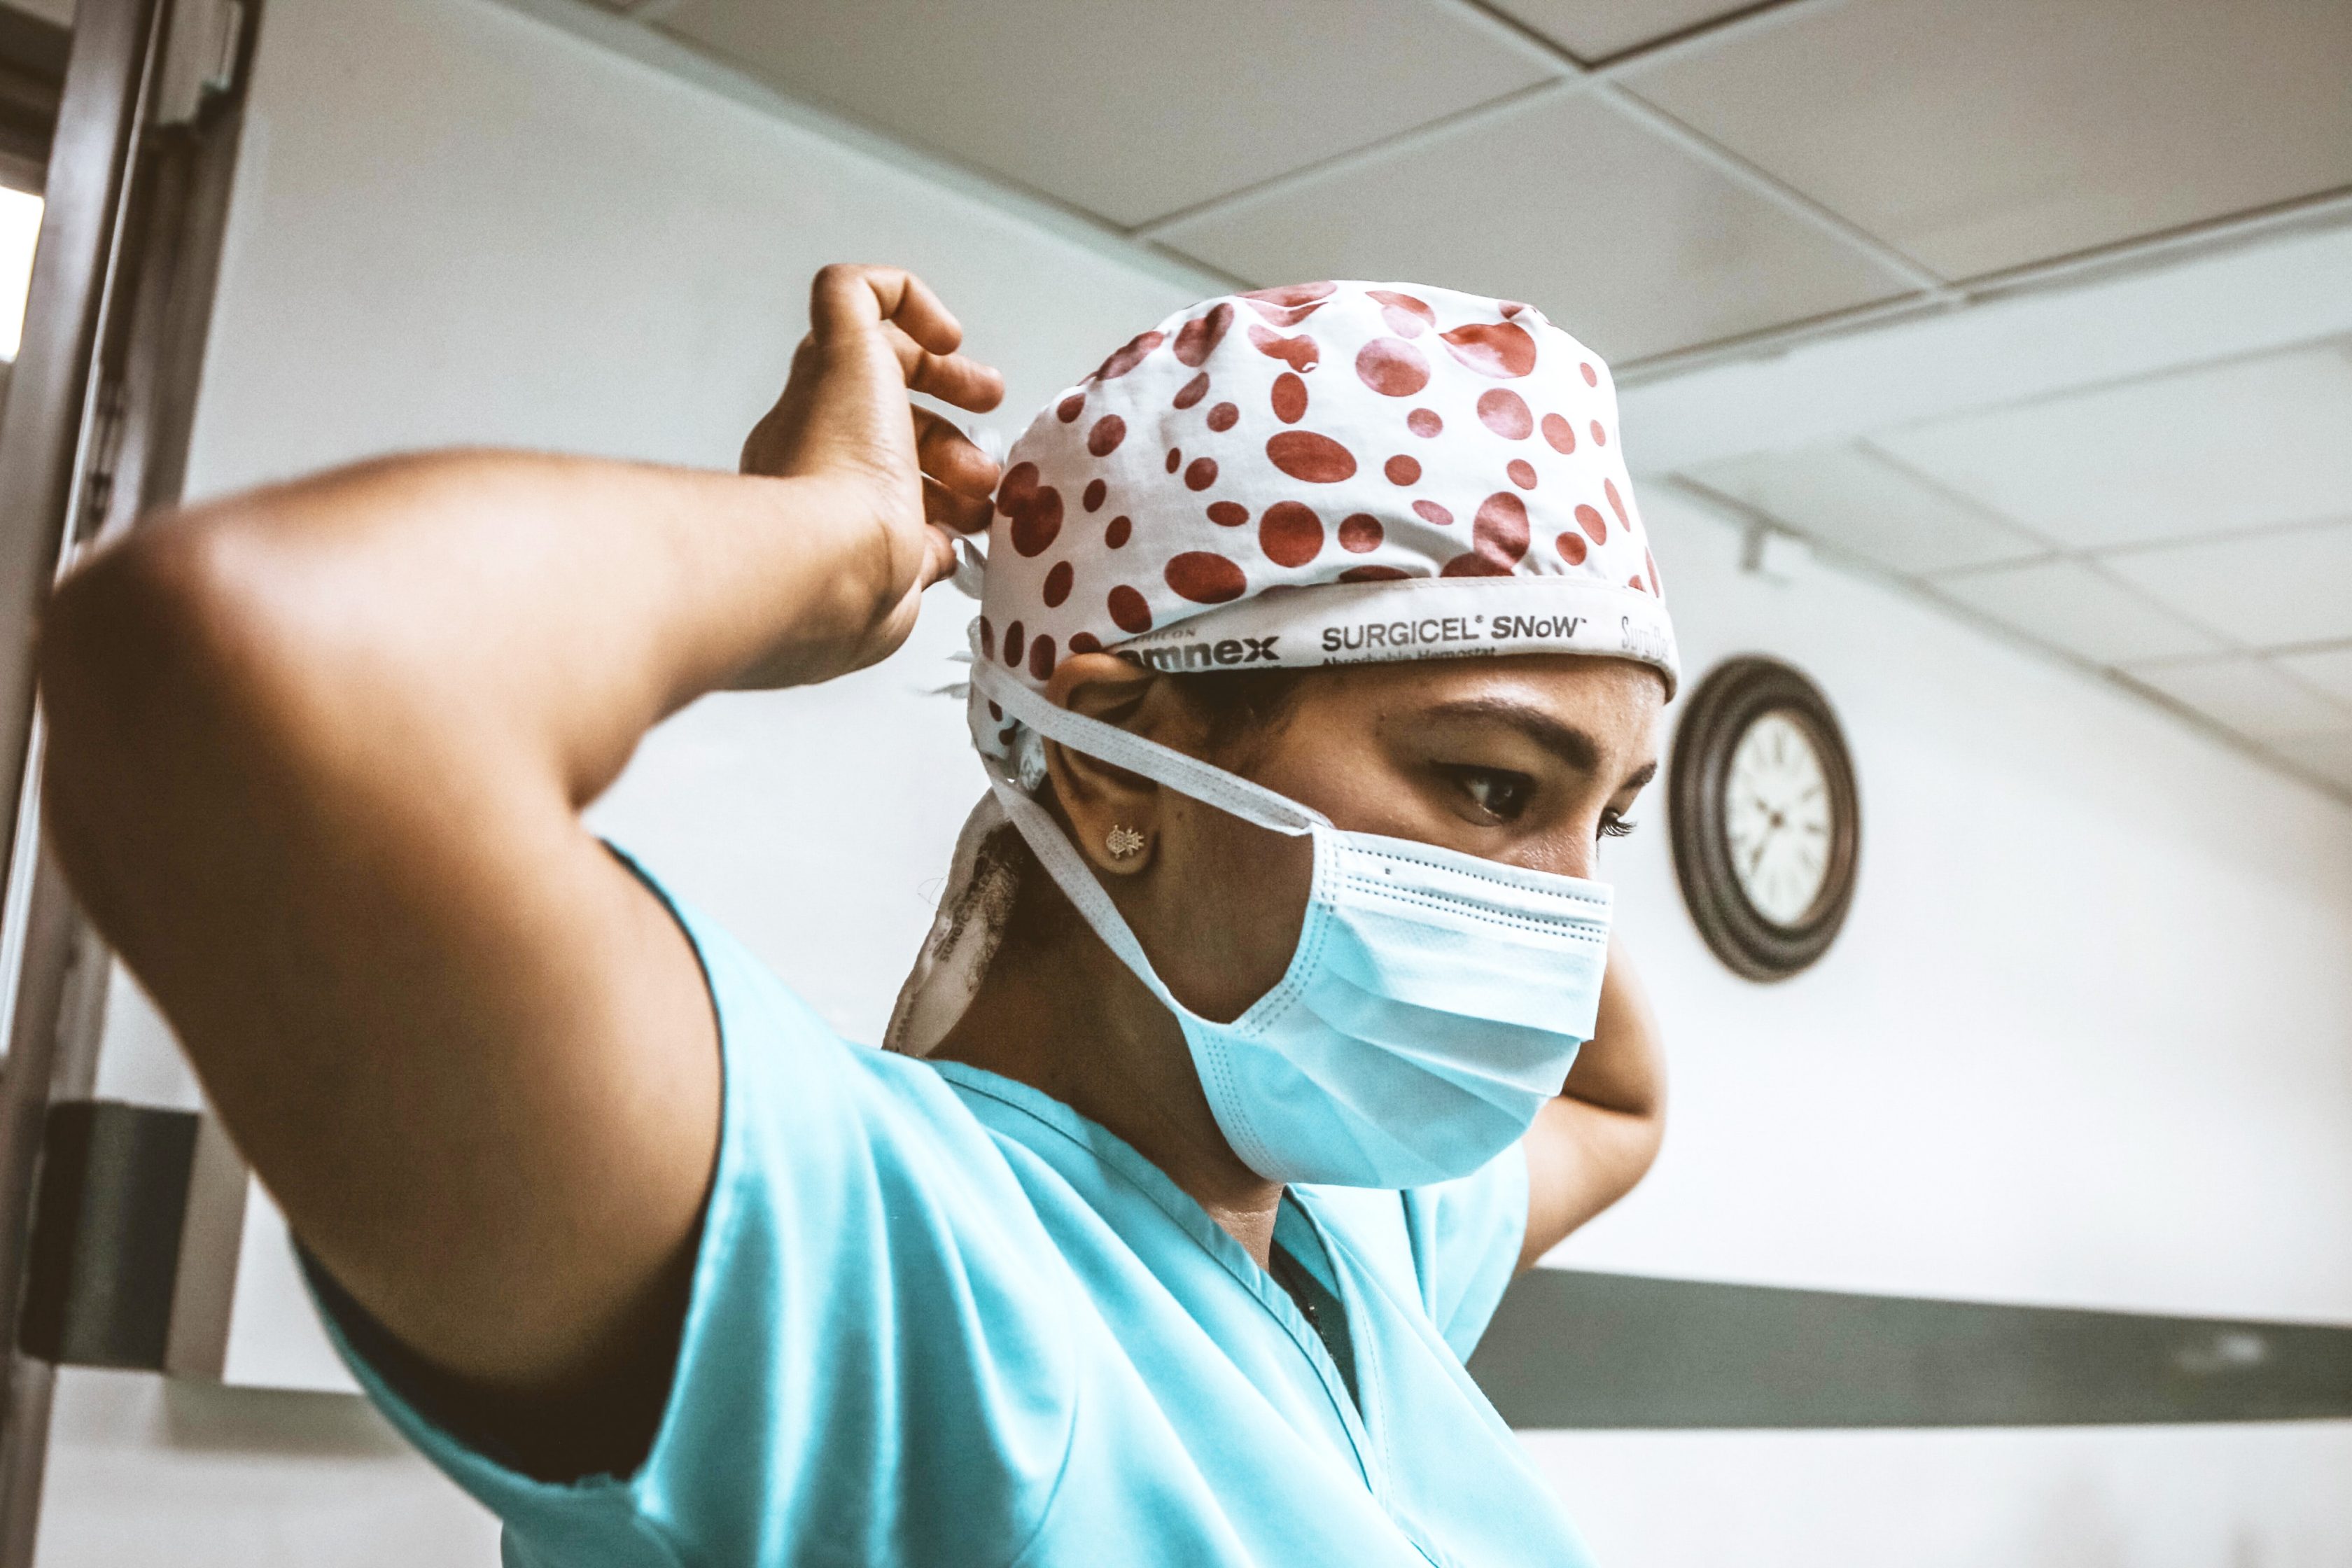 Nurse with mask within hospital environment